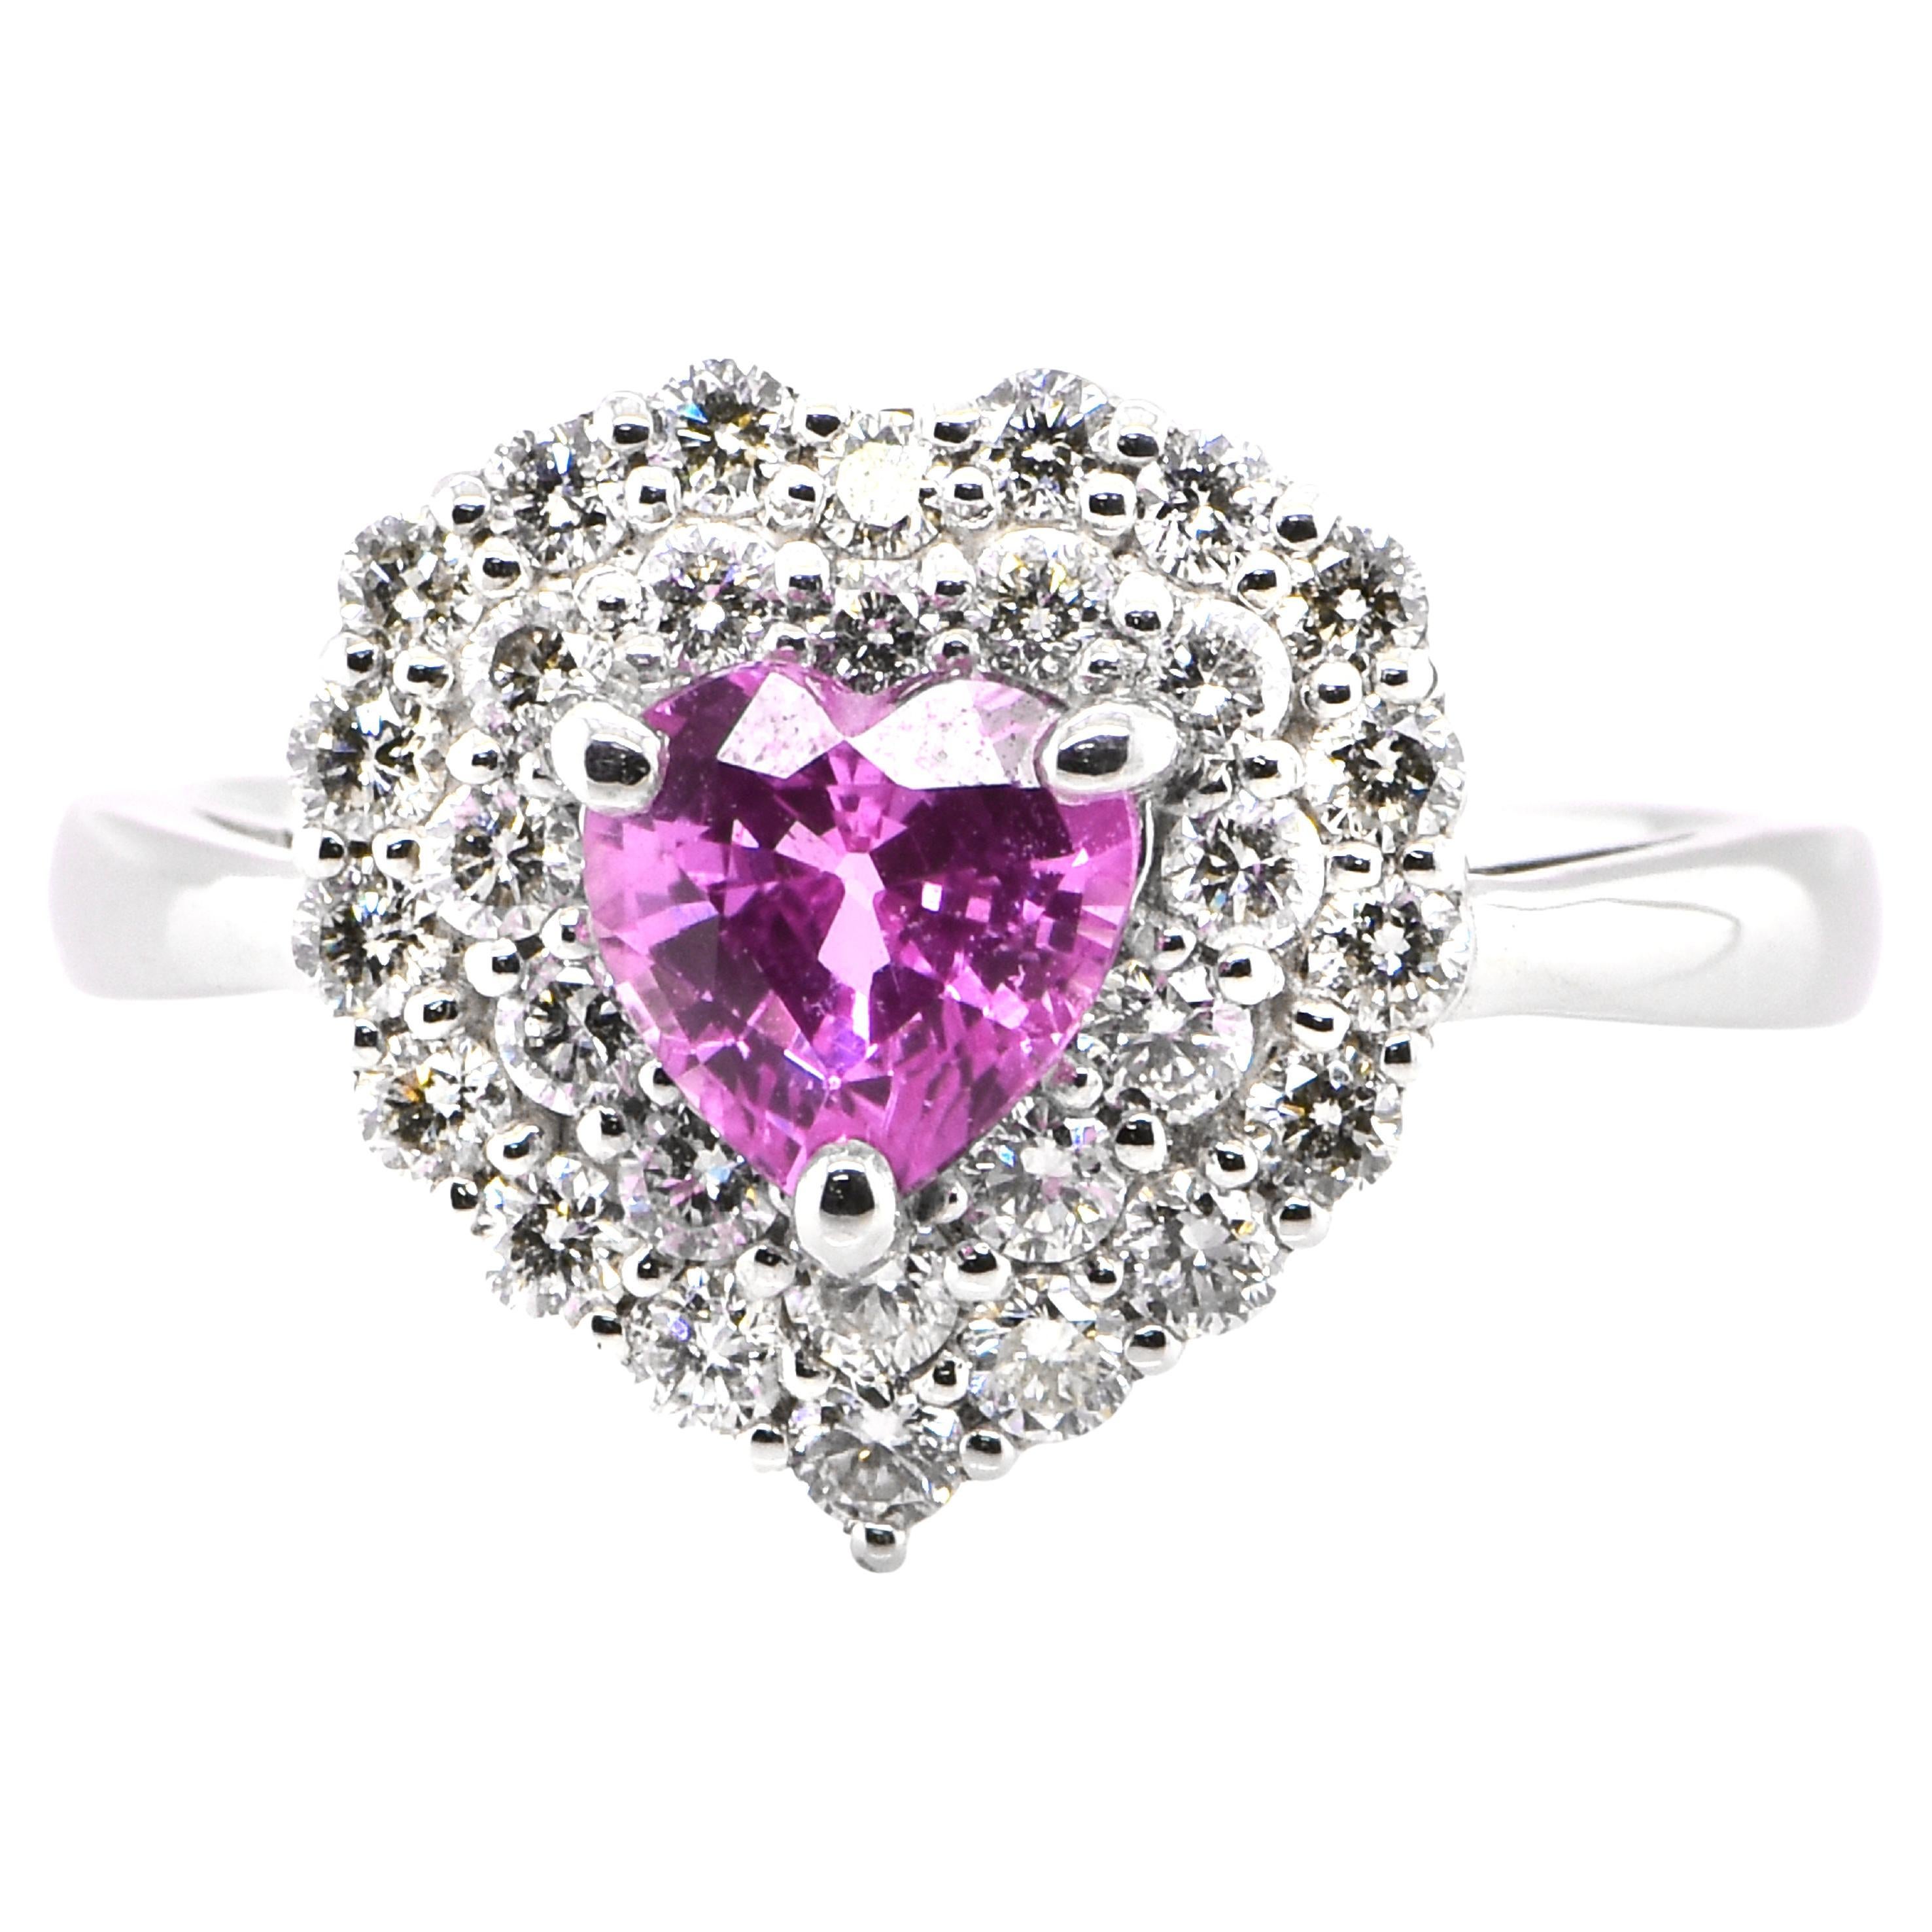 1.06 Carat Heart-Cut Pink Sapphire and Diamond Double-Halo Ring Set in Platinum For Sale